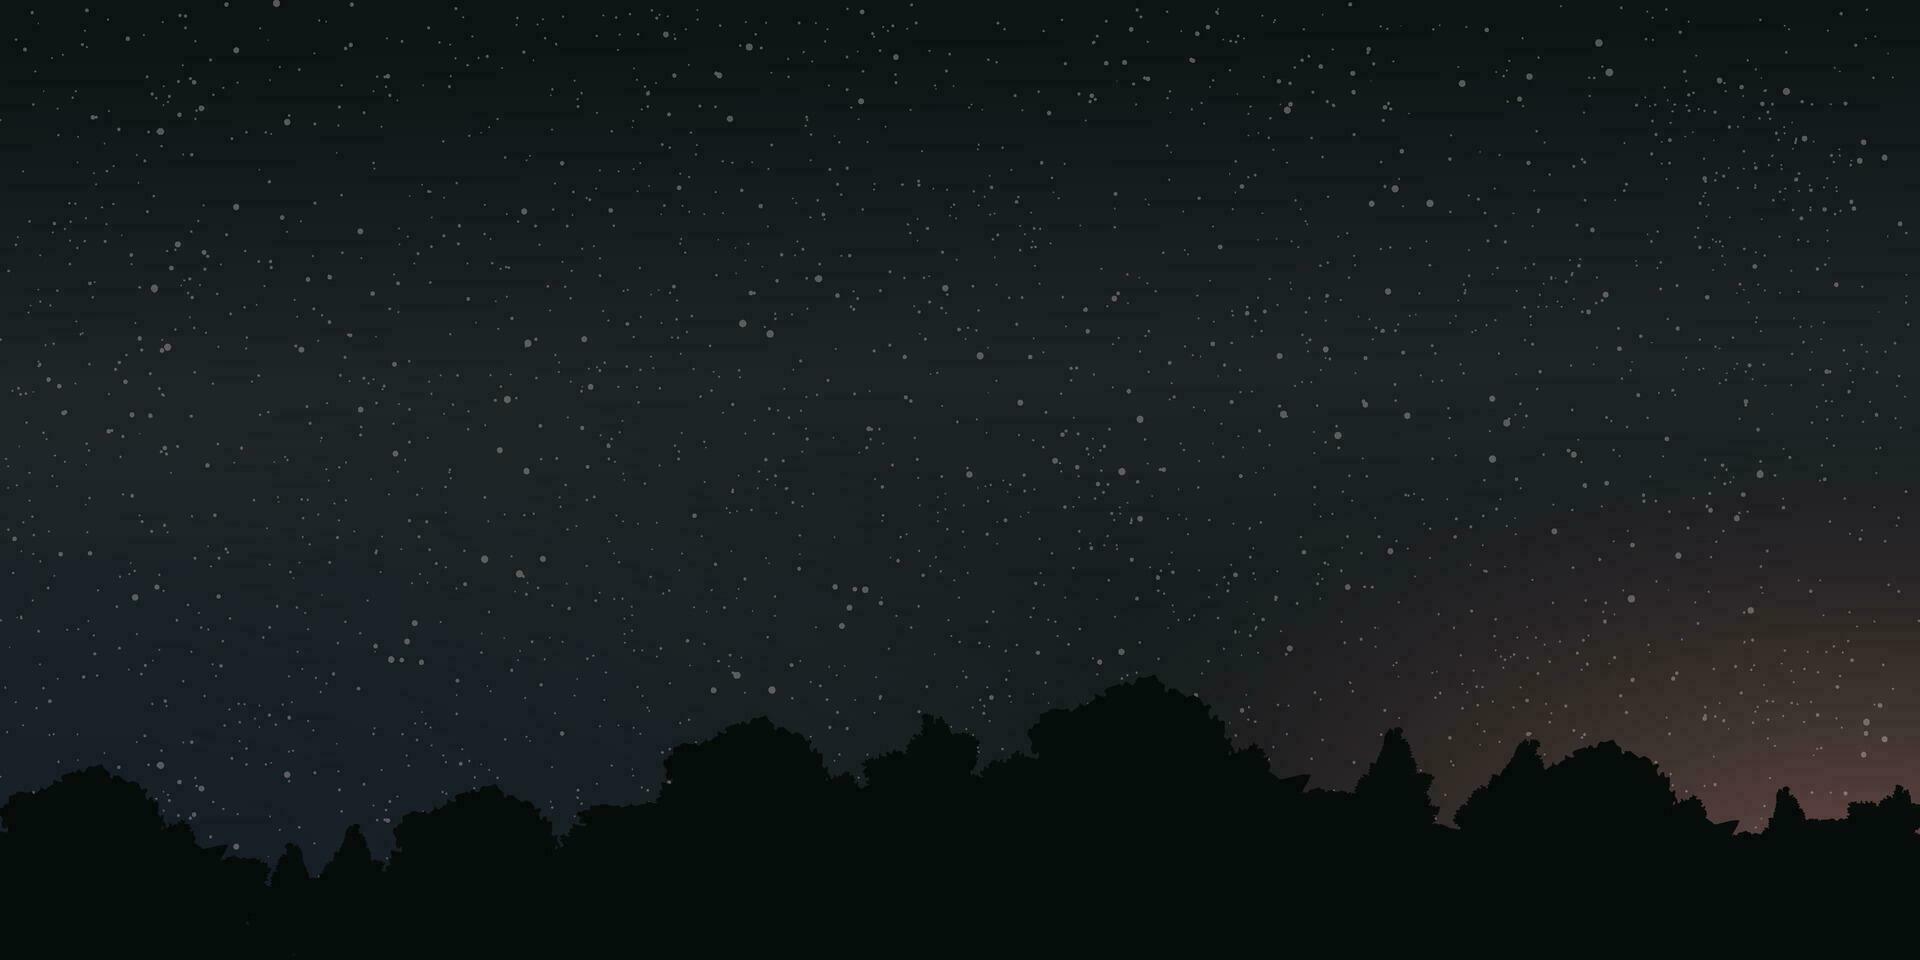 Night sky with a lot of star background have silhouette forest forground vector illustration.